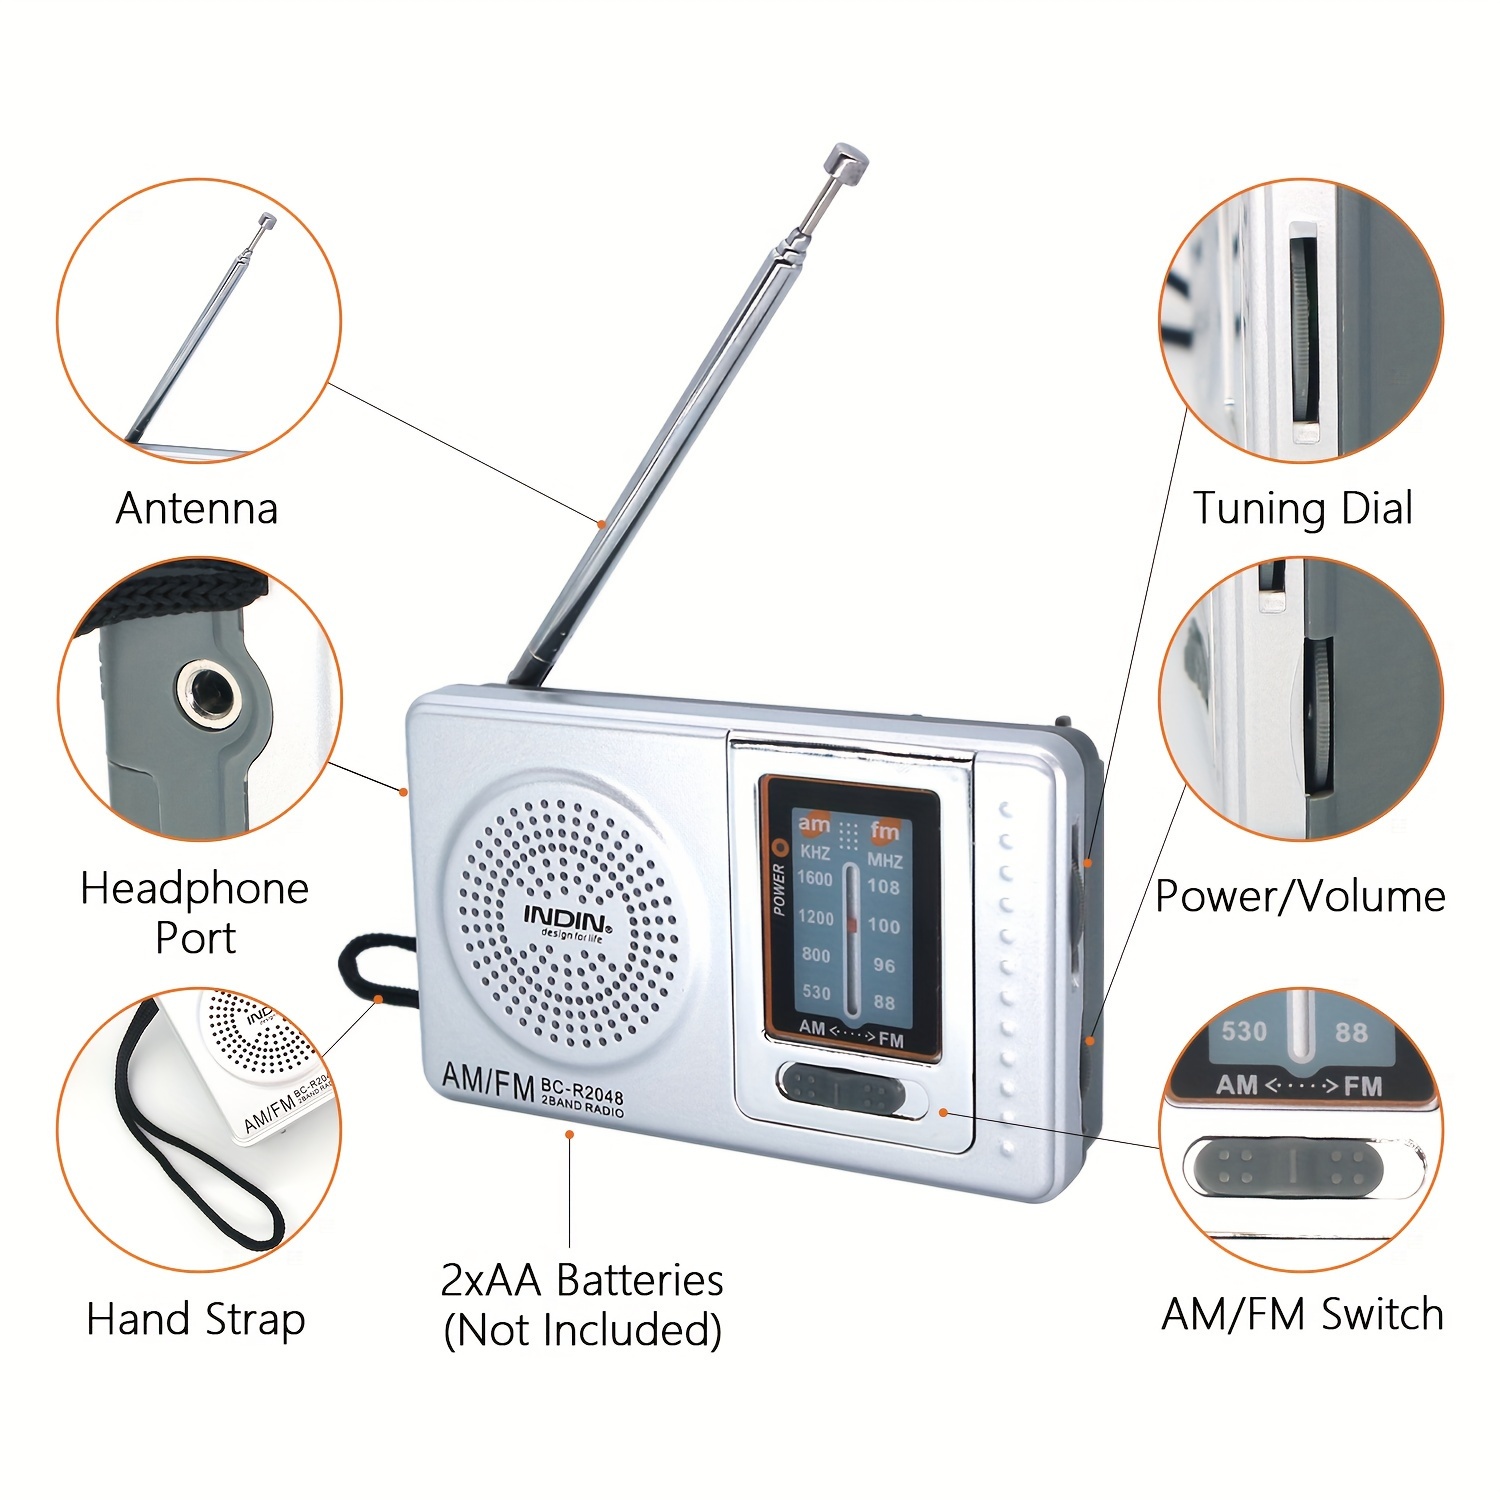 Pocket Radio, Small Portable Digital AM FM Battery Operated Radio with  Built-in Speaker 